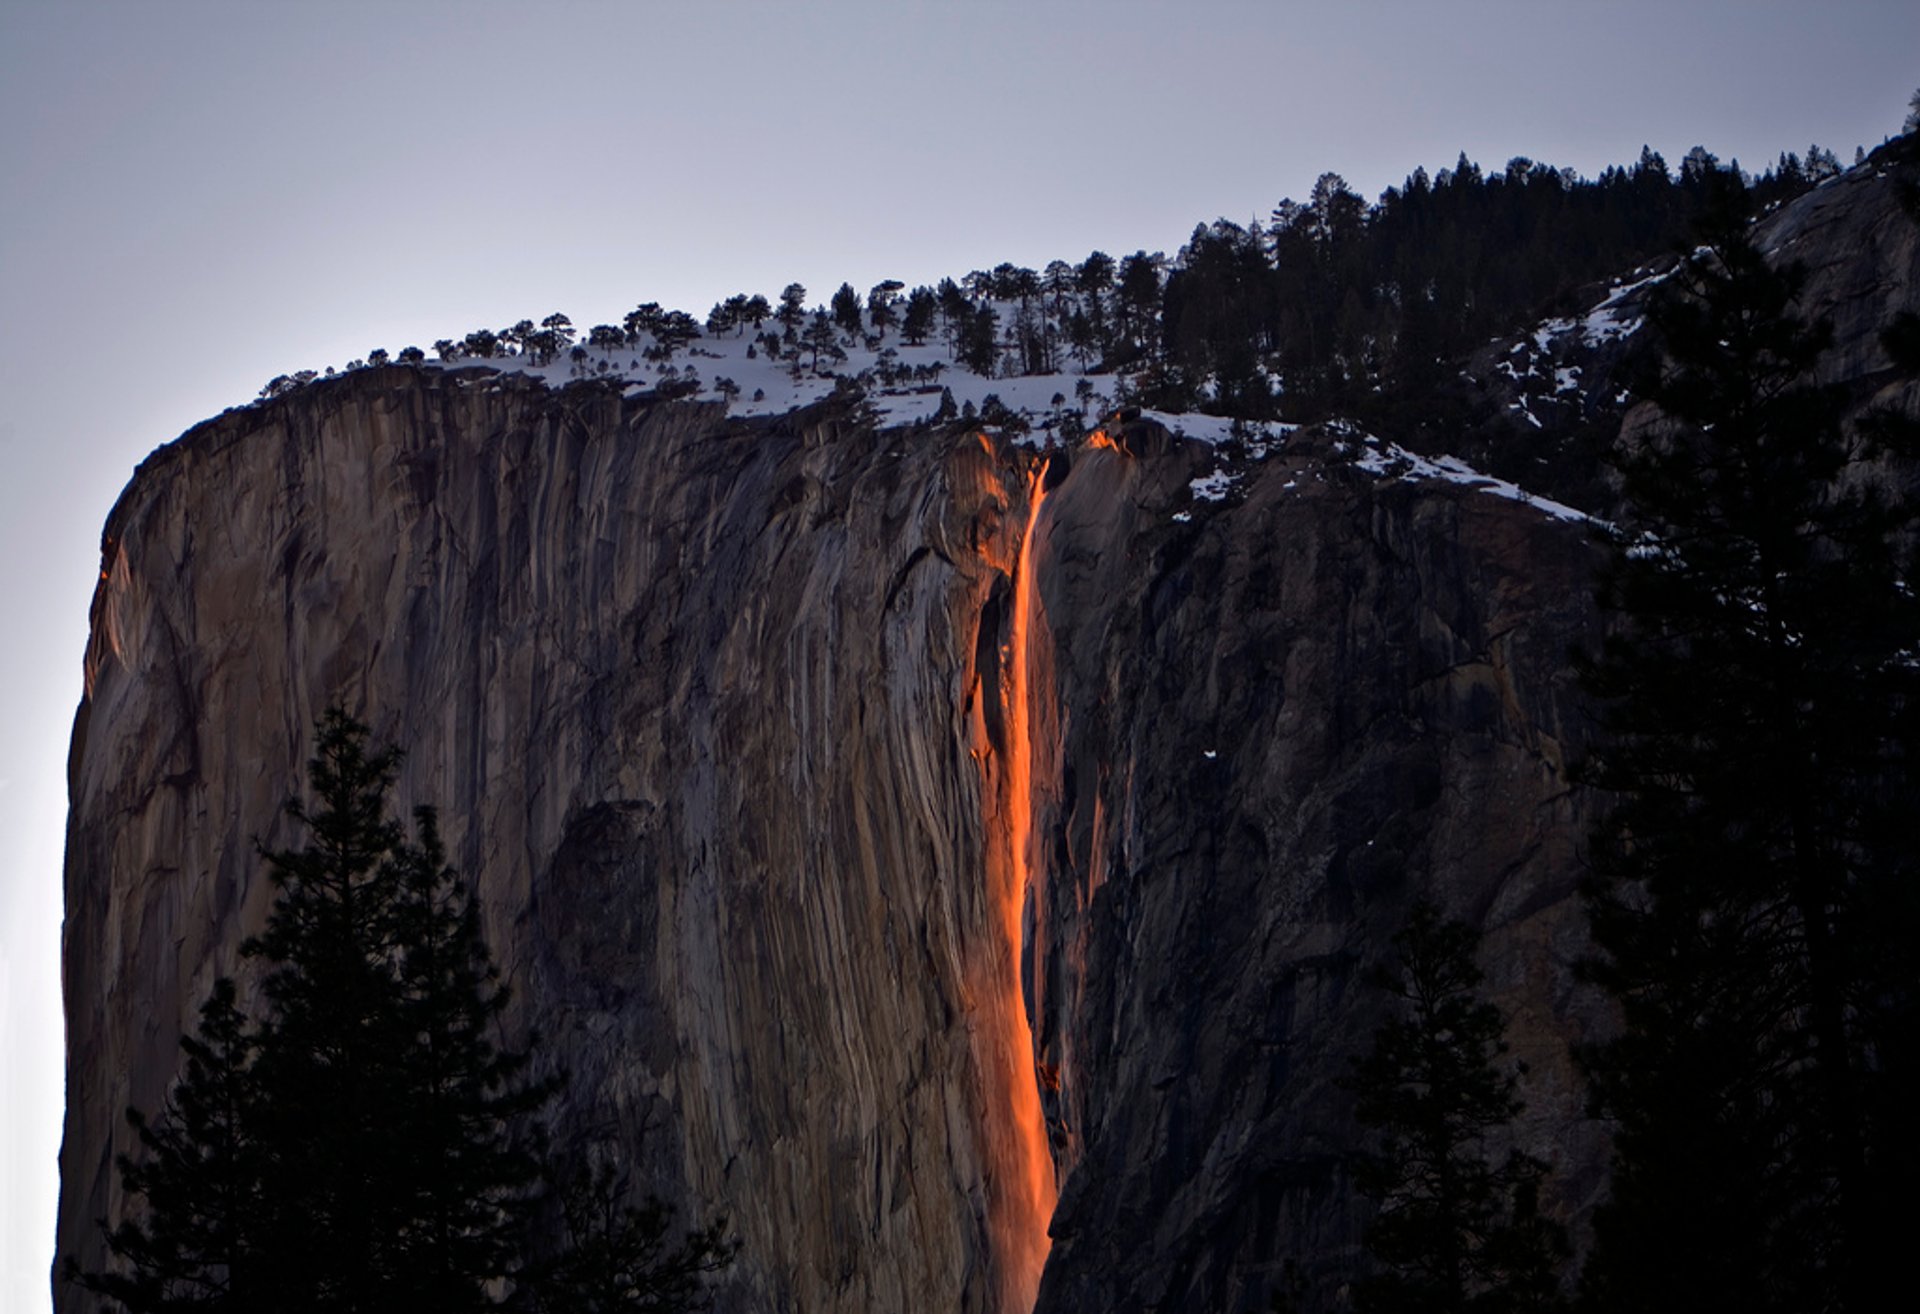 Horsetail Fall or Firefall